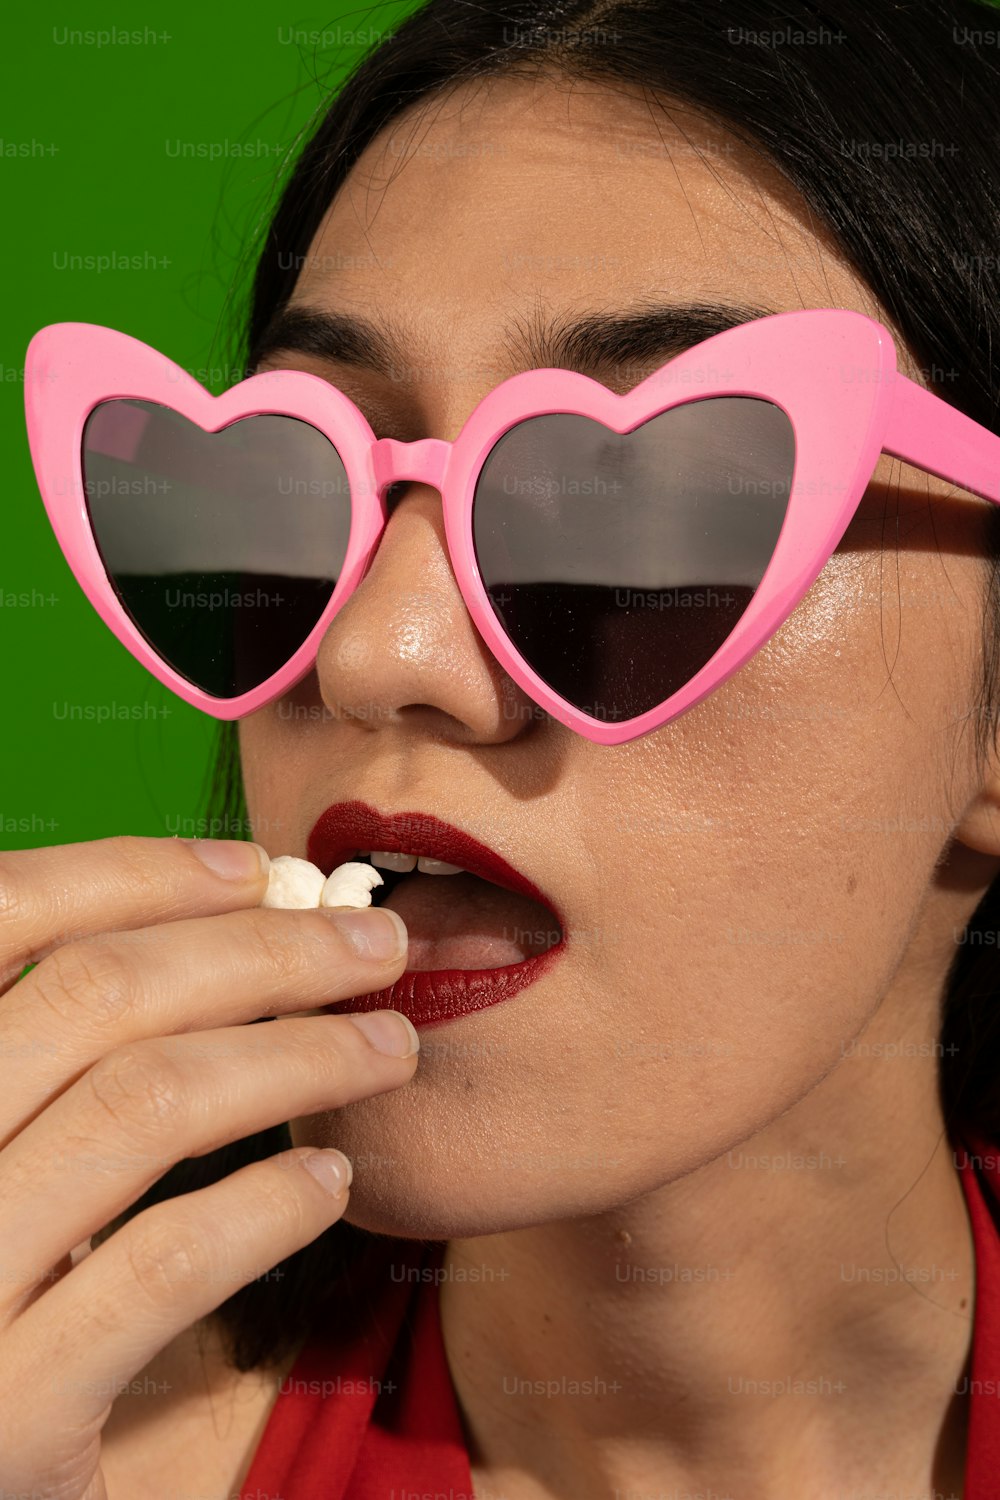 a woman wearing heart shaped sunglasses eating a piece of food